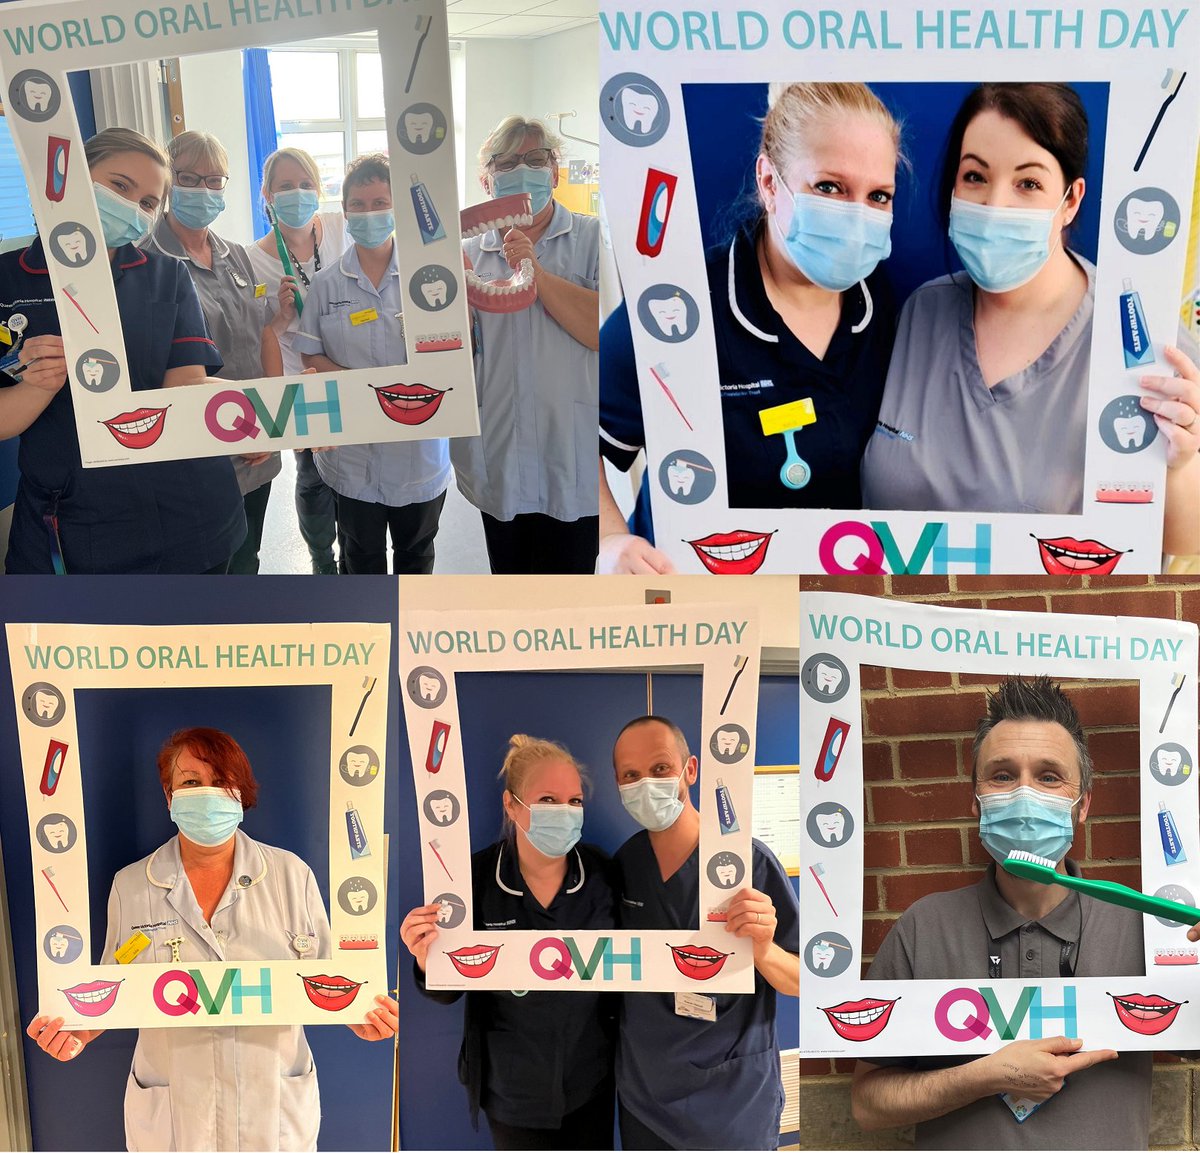 Although it was #WorldOralHealthDay yesterday we love this picture so want to share it again! Our Mouth Care Team are passionate about promoting good oral health - all clinical staff receive training to help support our patients - and as this shows, it can be quite fun! #TeamQVH